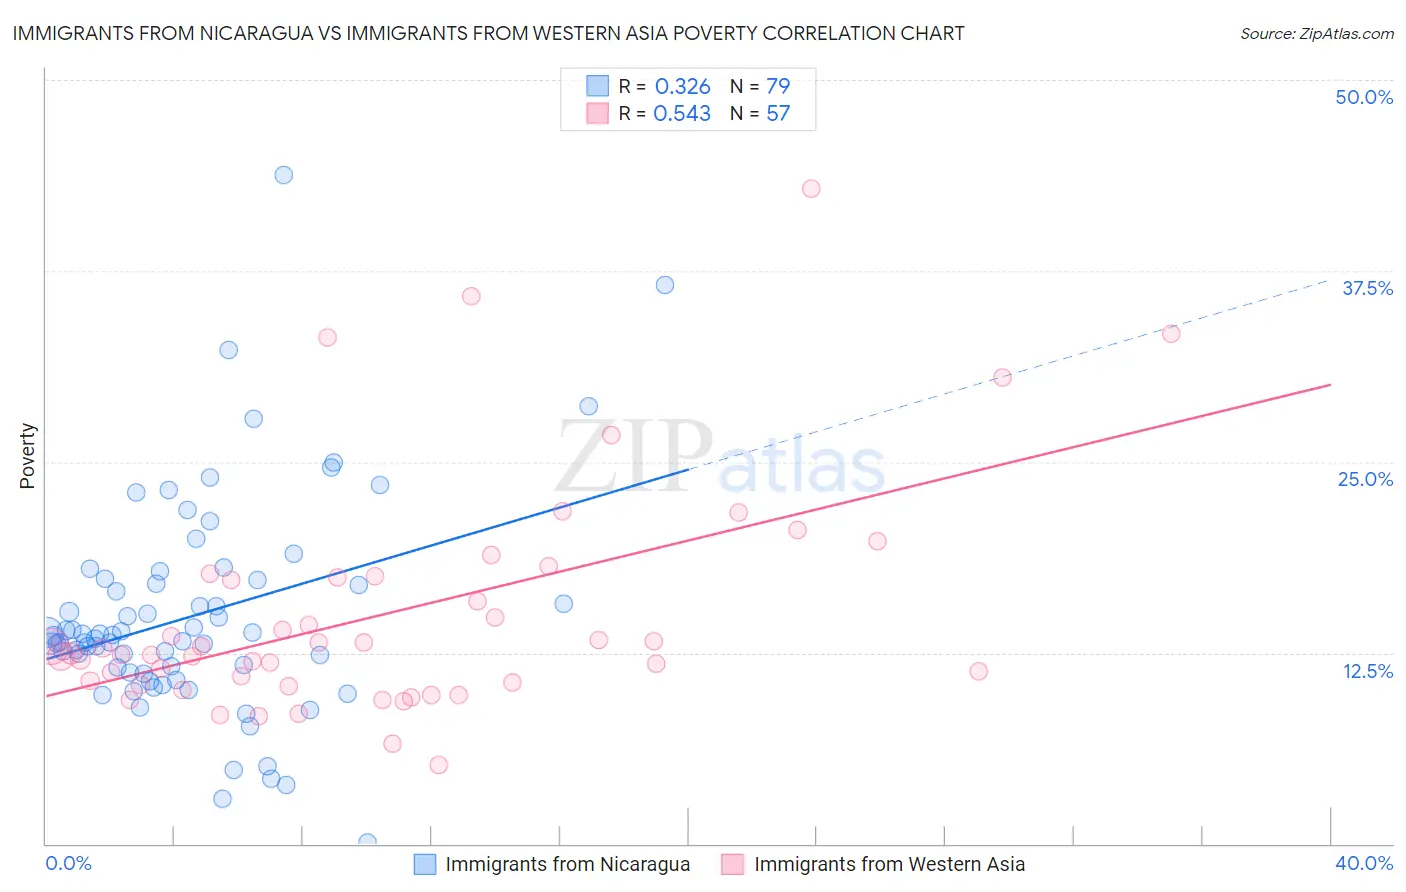 Immigrants from Nicaragua vs Immigrants from Western Asia Poverty